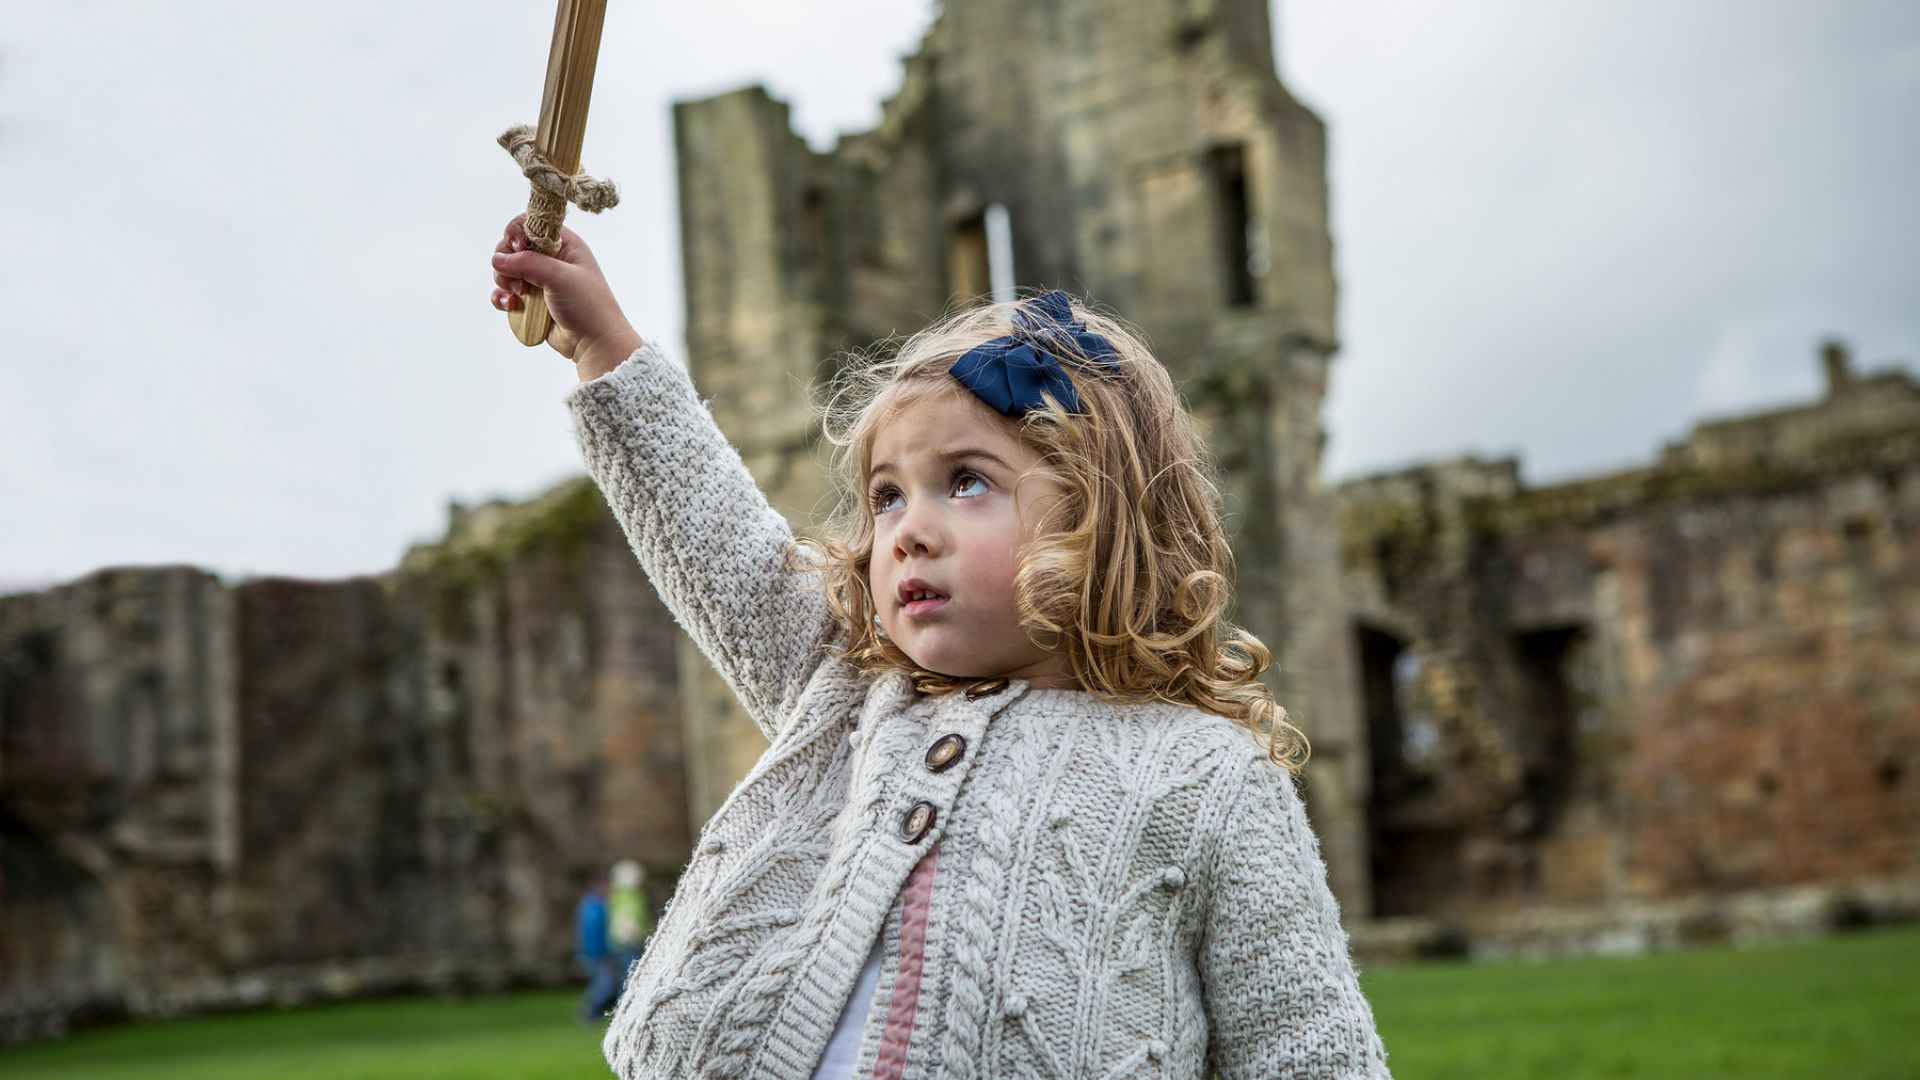 Events at Warkworth Castle